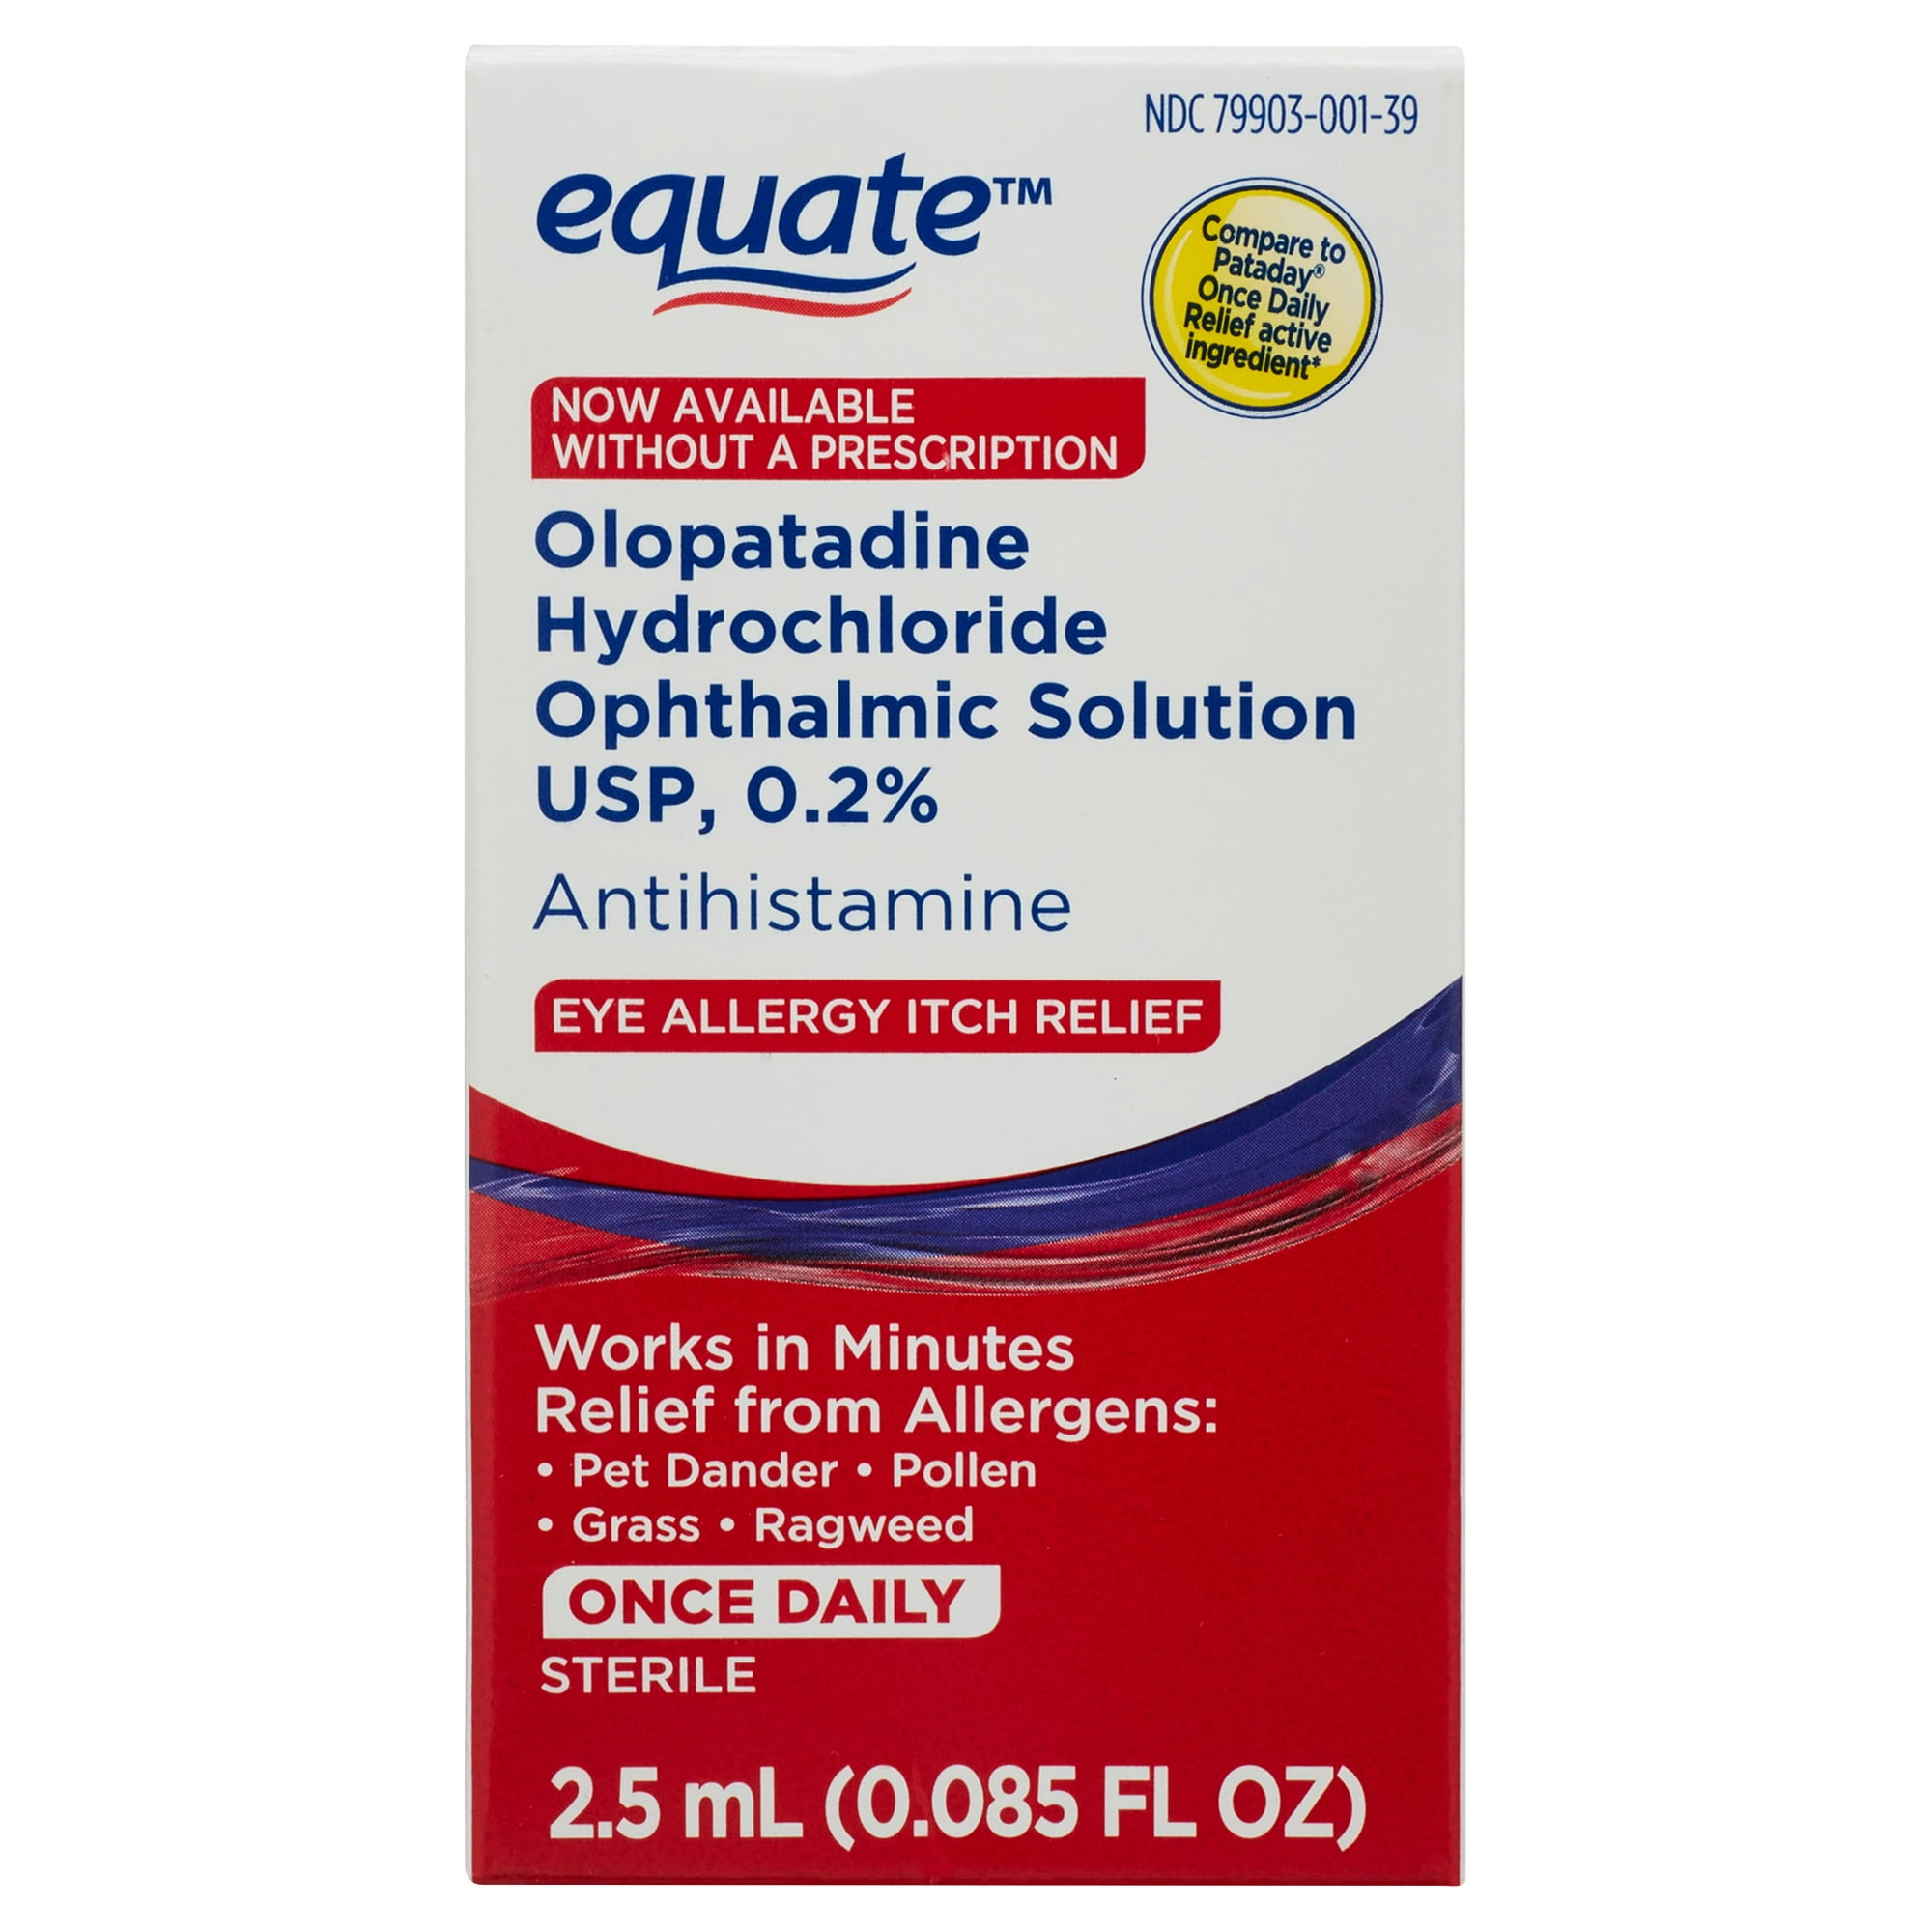 Equate Eye Allergy Itch Relief